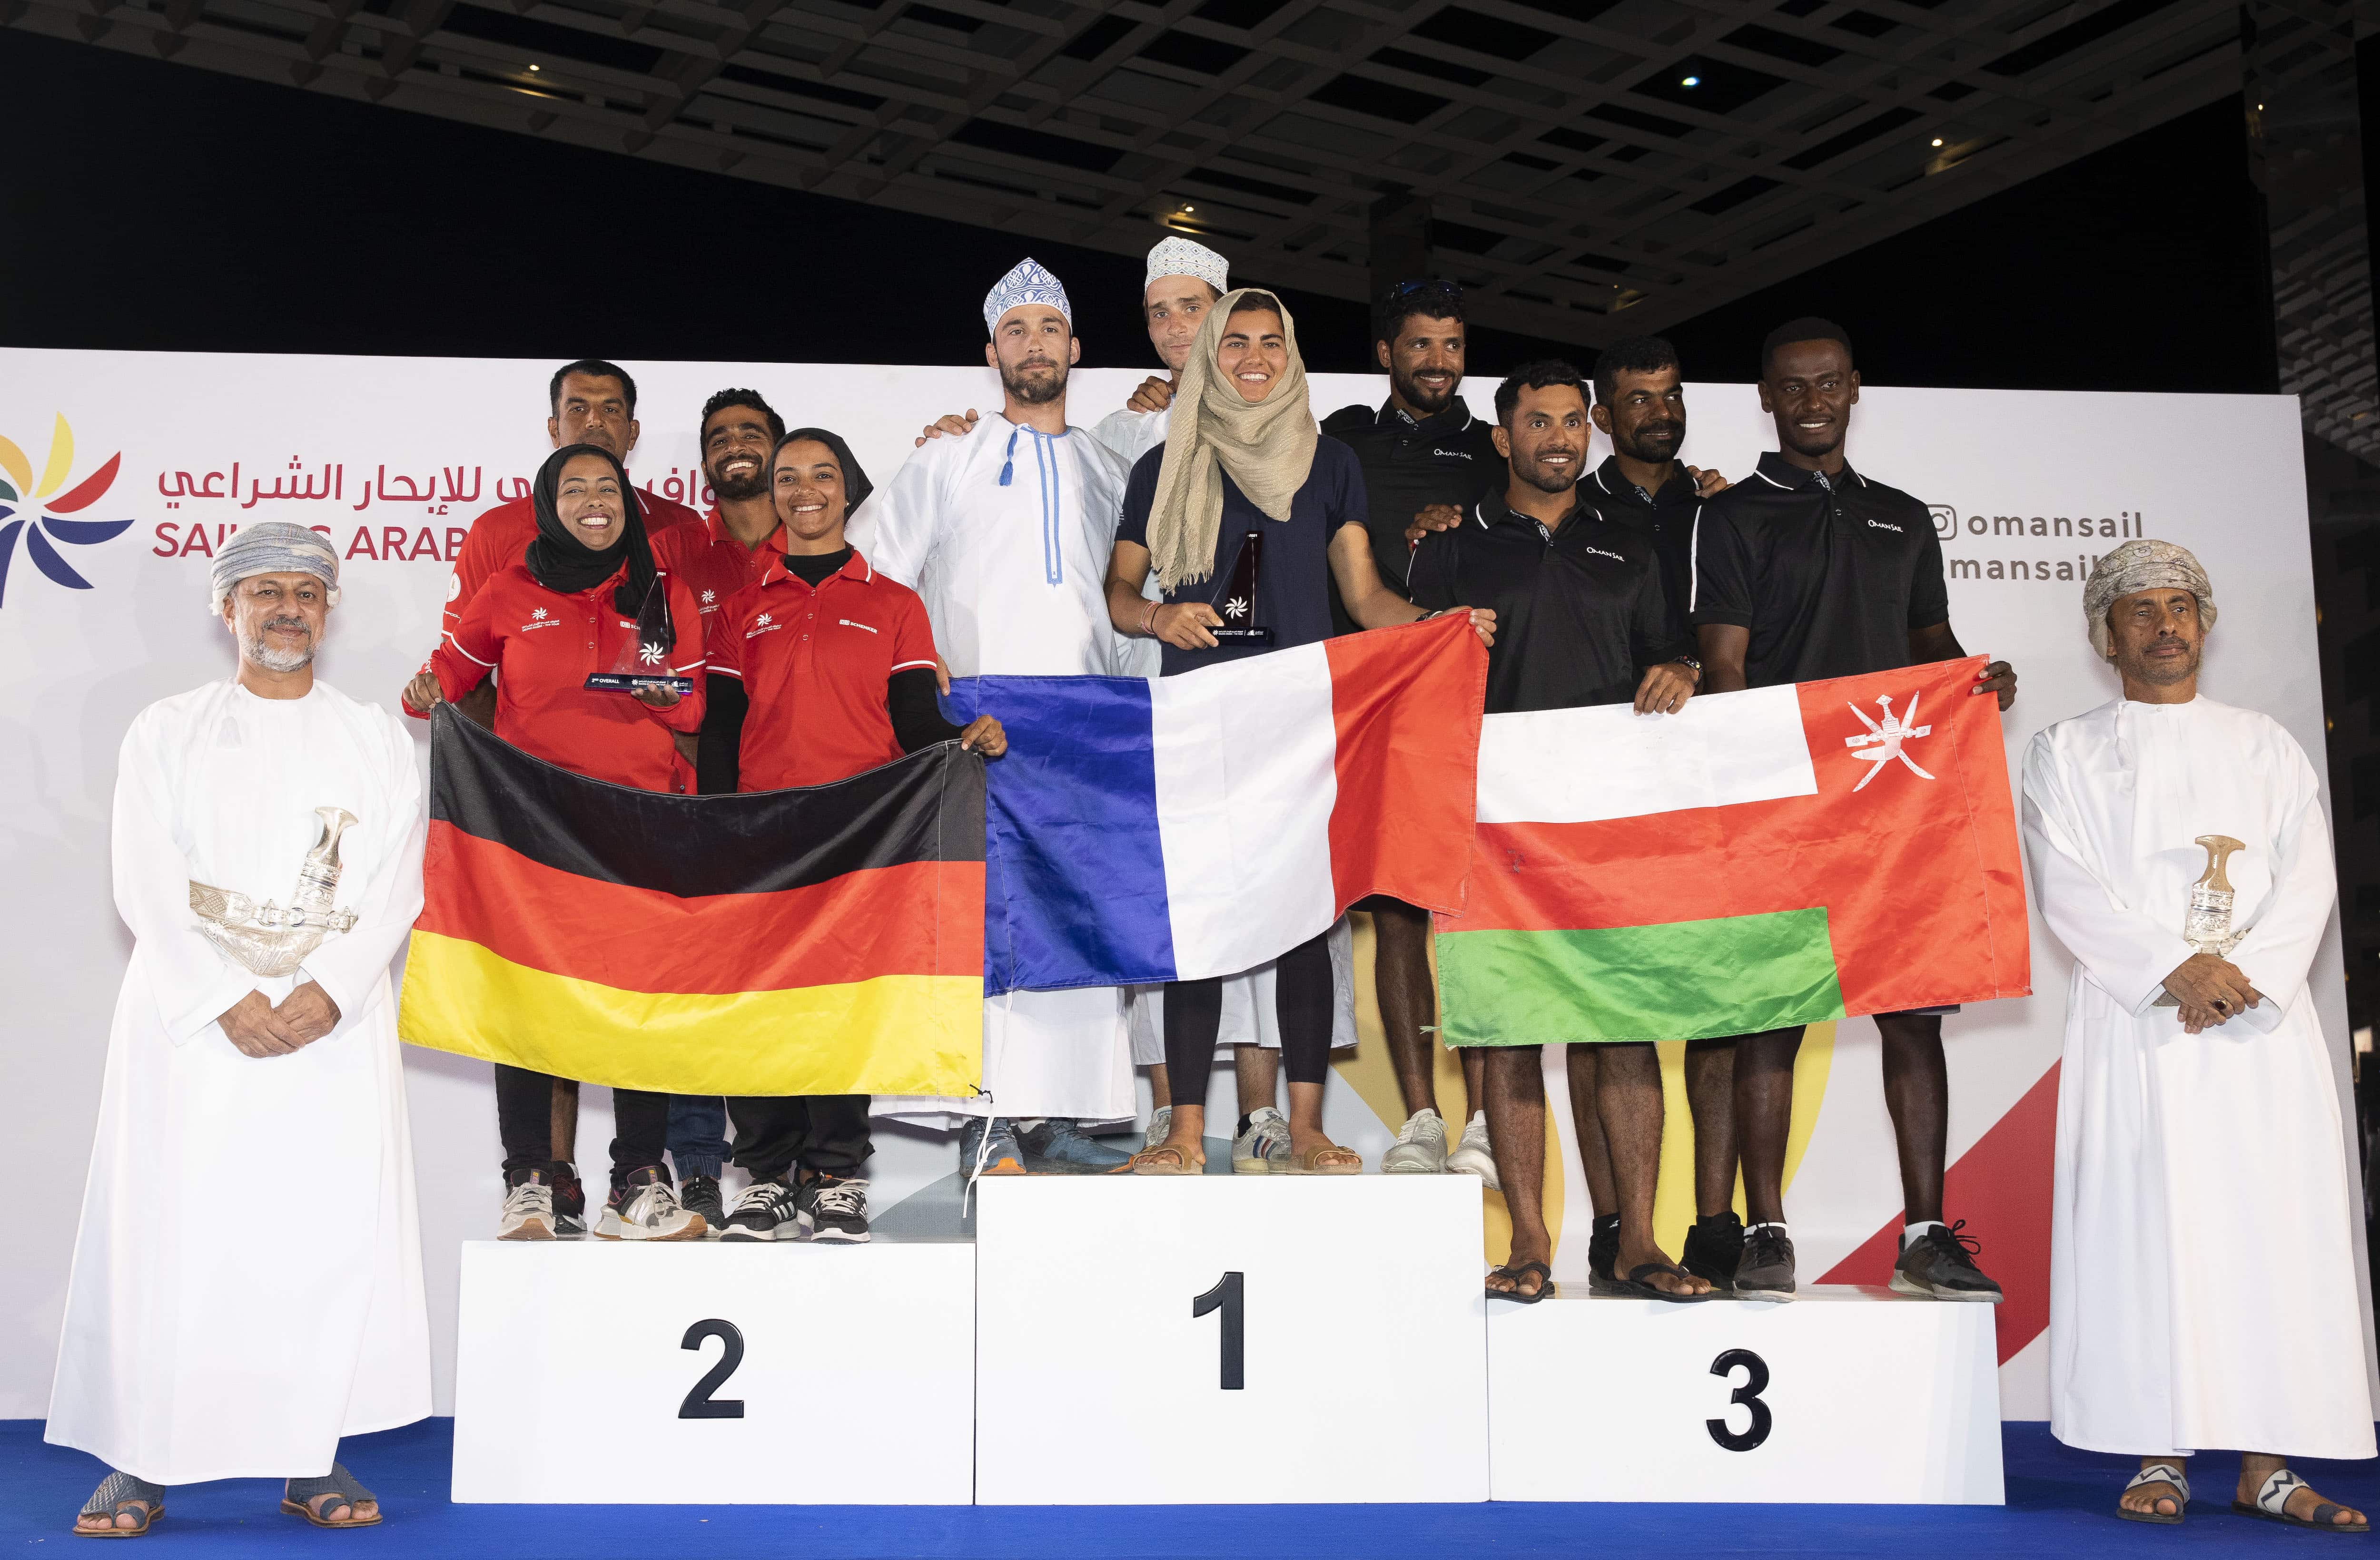 Team France wraps up Sailing Arabia – The Tour 2021 title in style